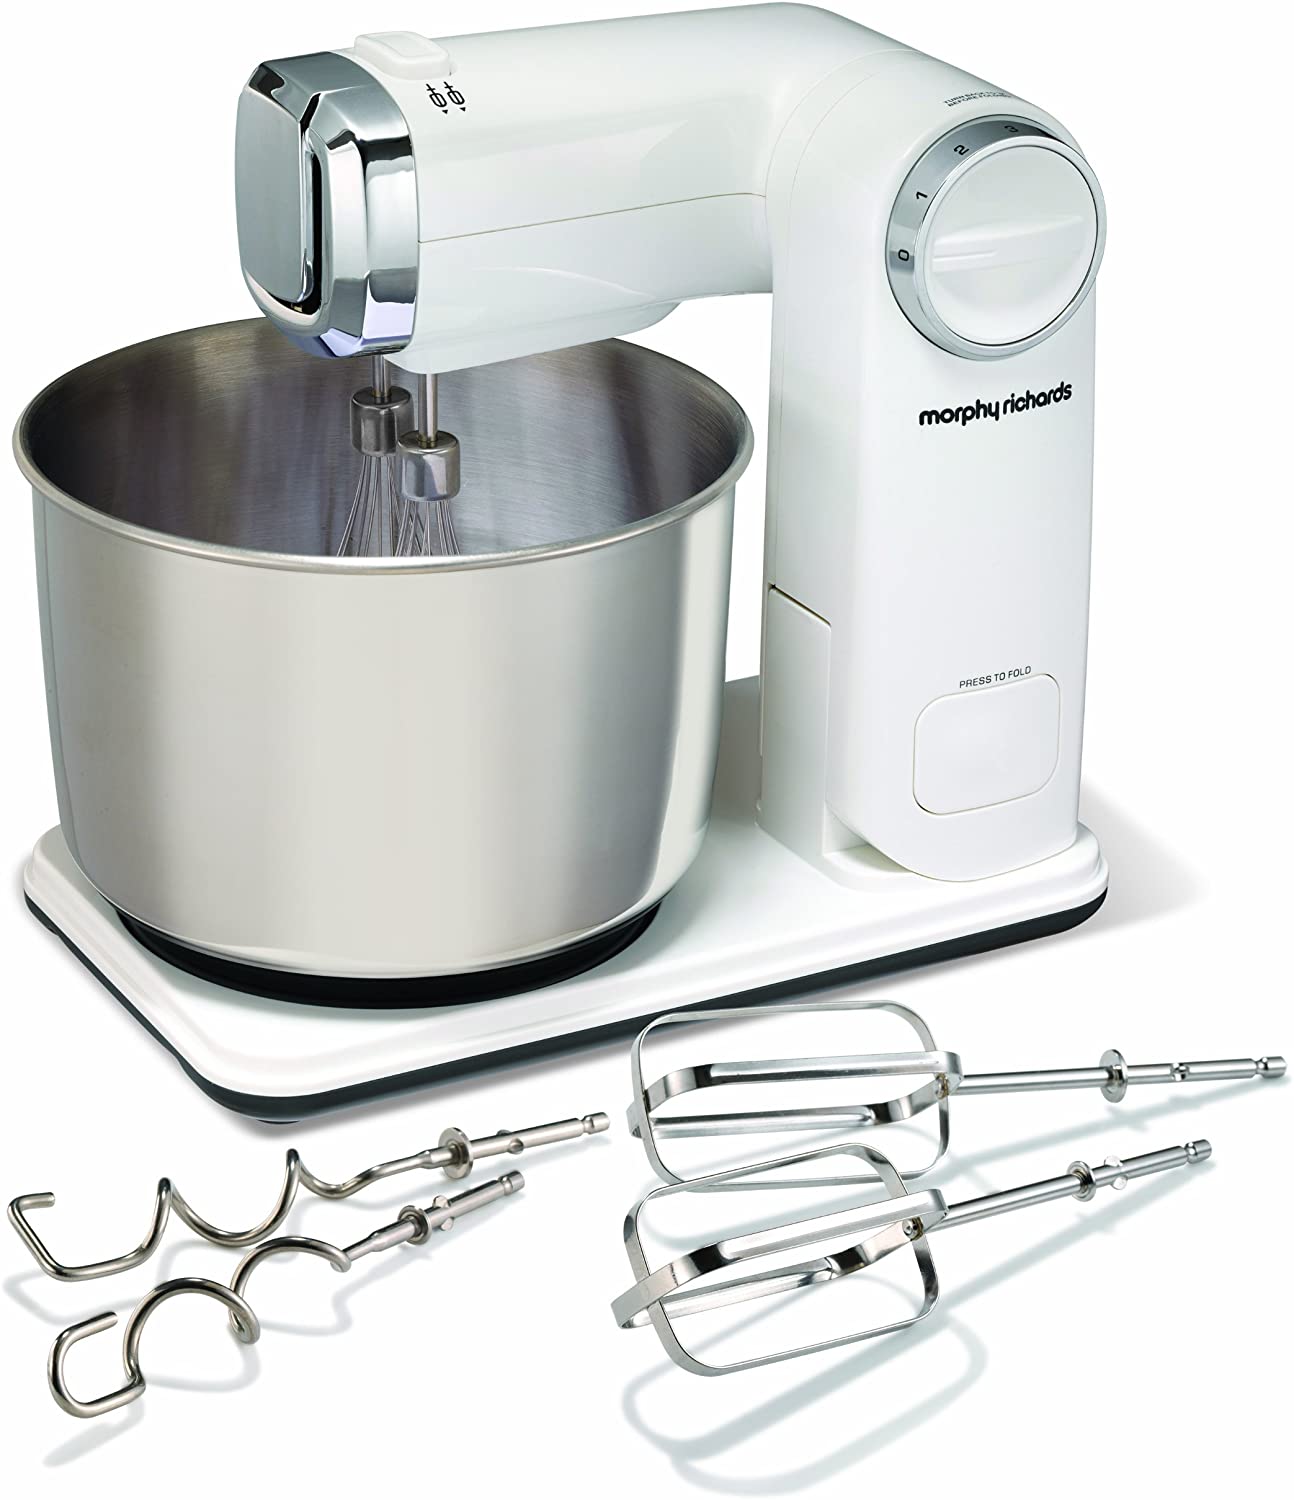 Morphy Richards 48992 Folding Stand Mixer - White